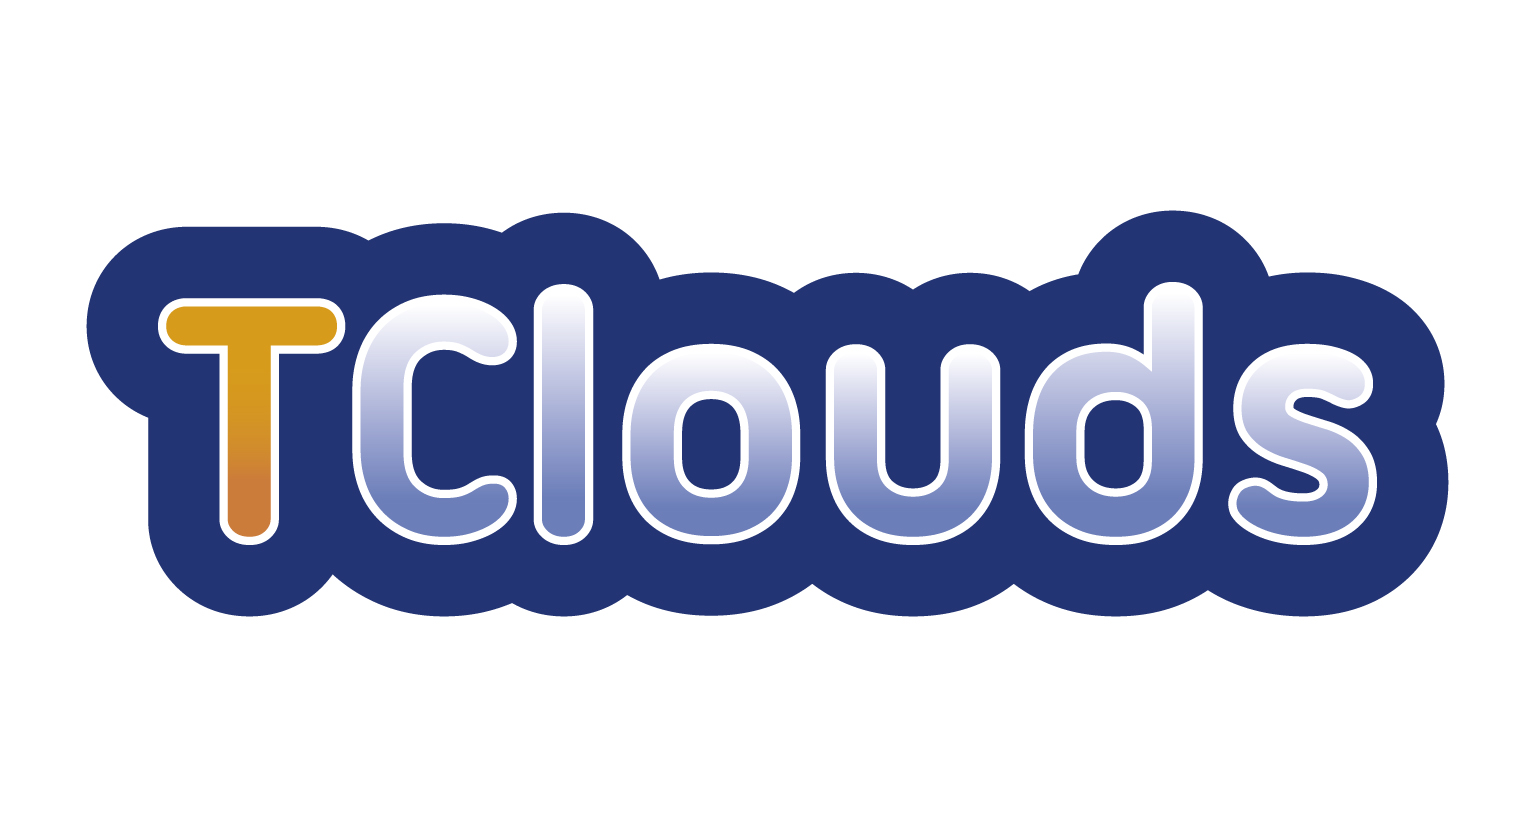 Supported by TClouds